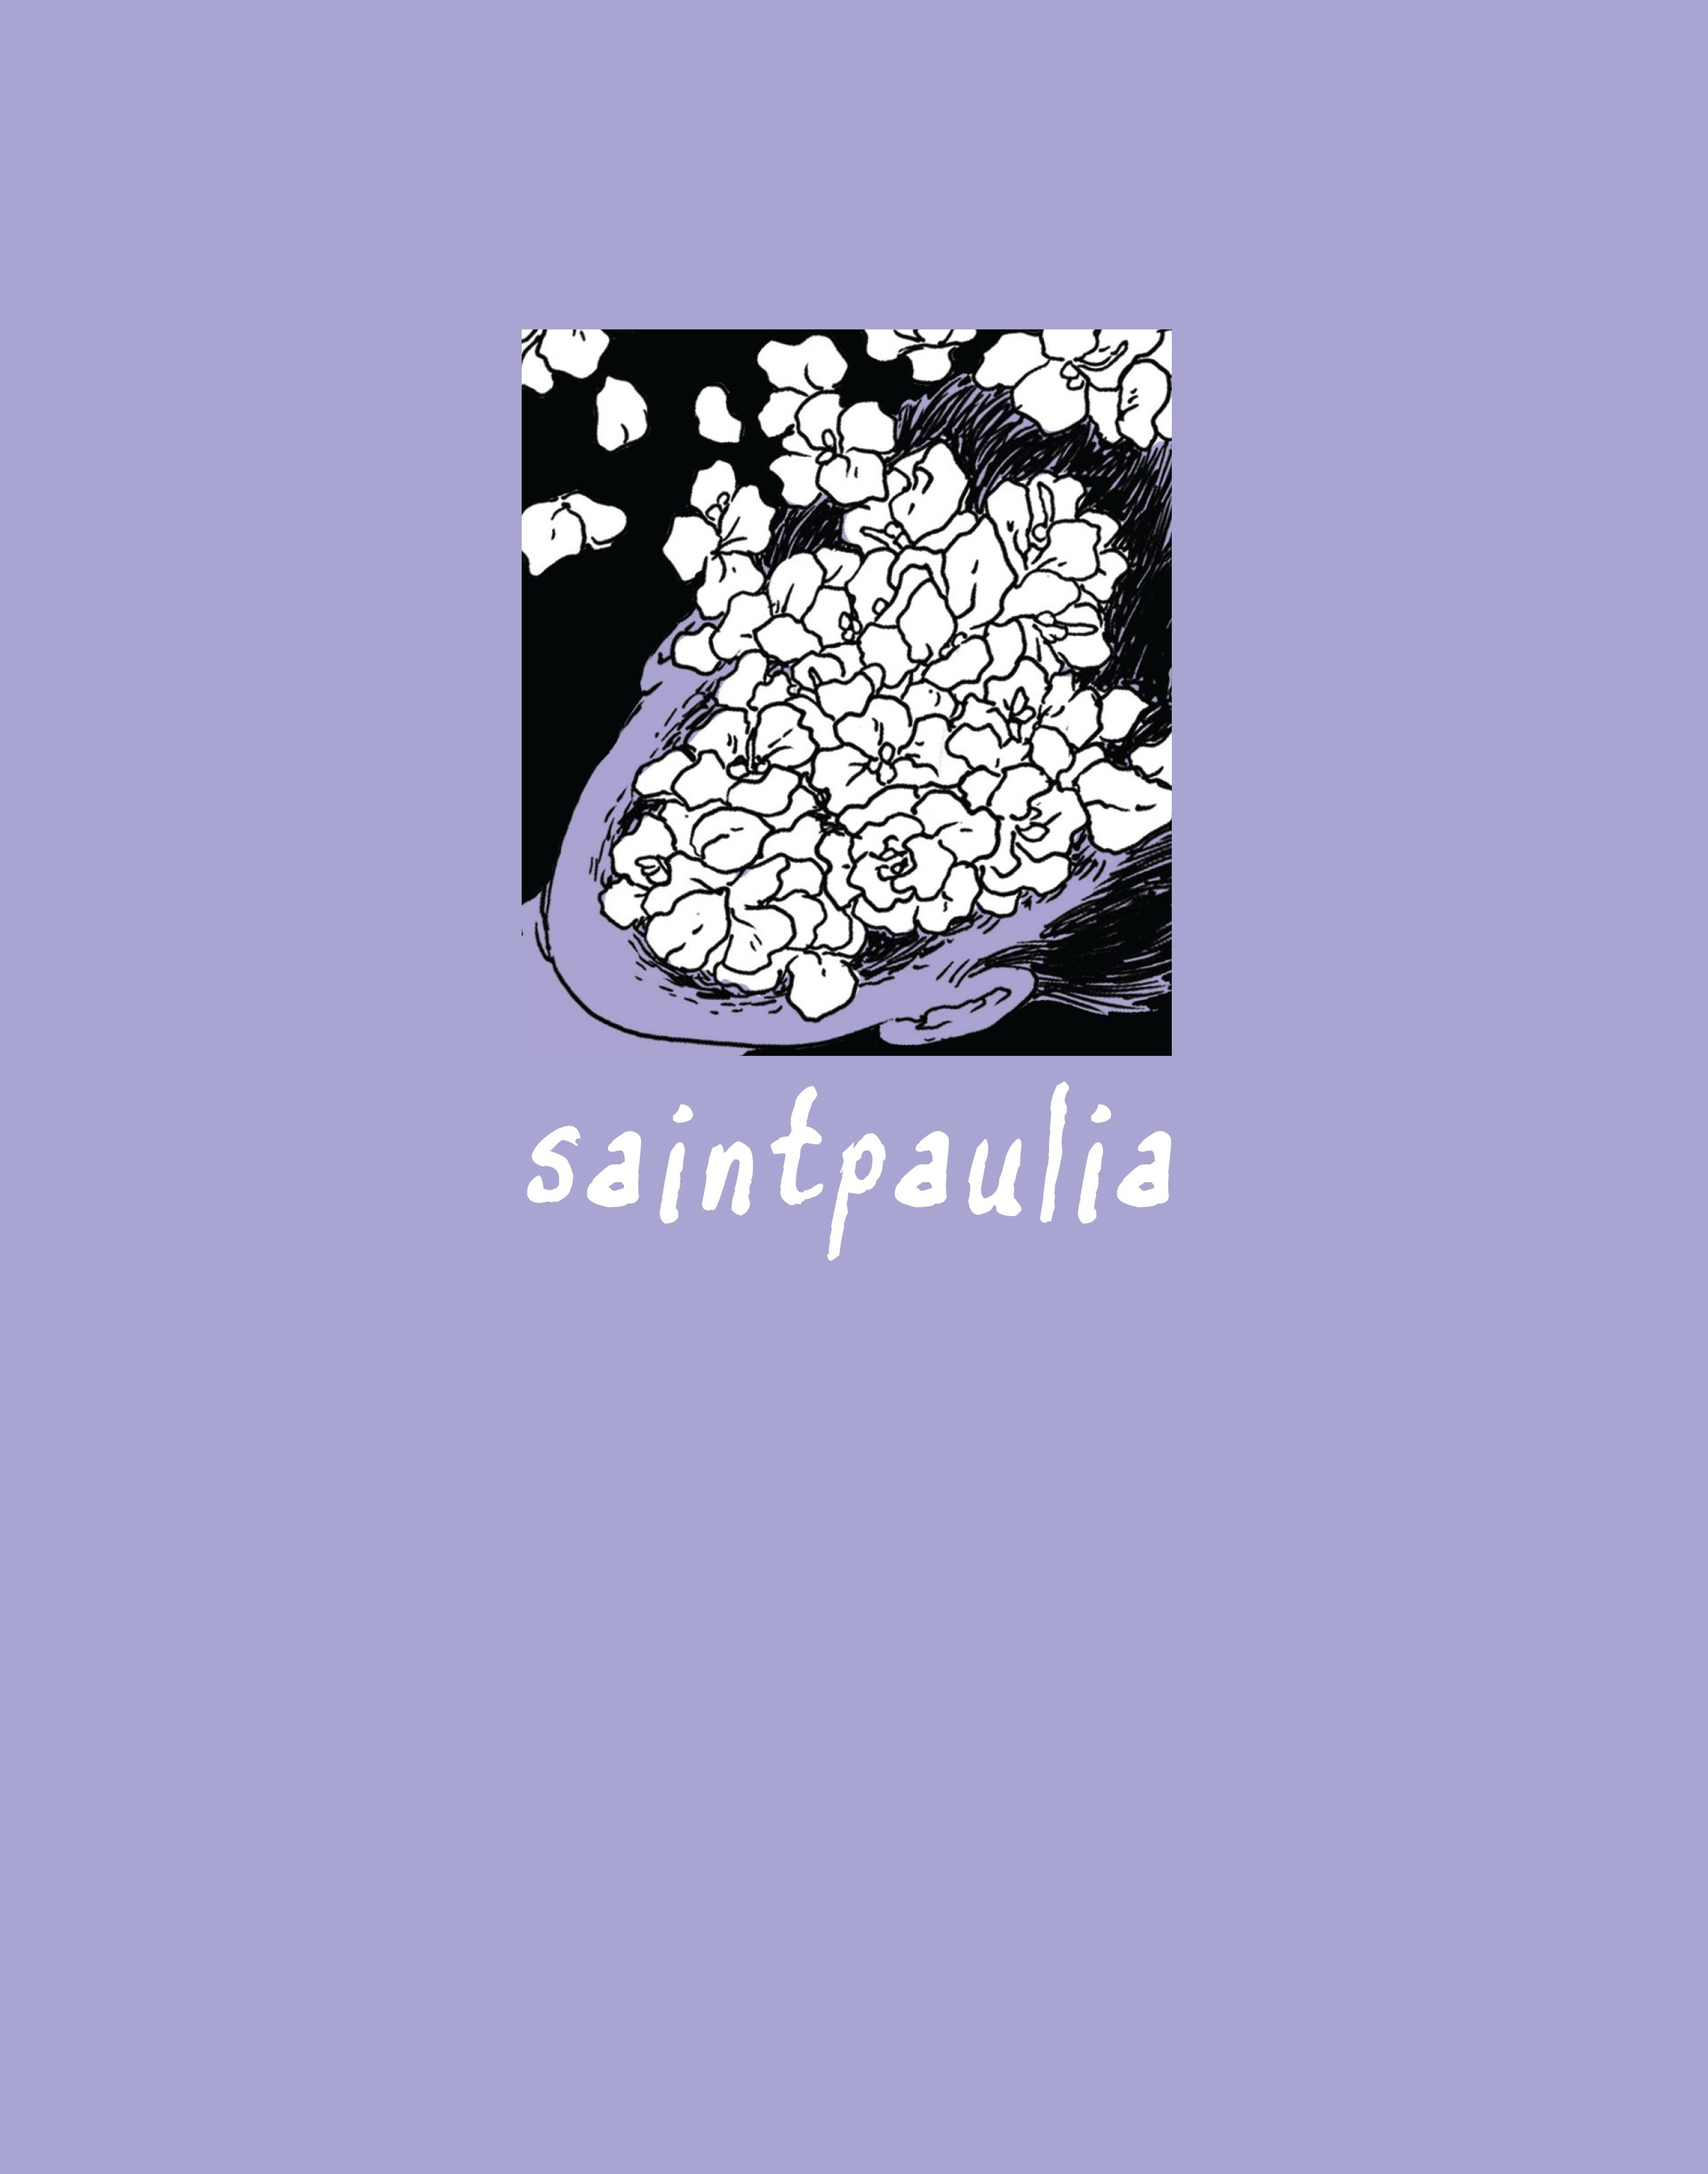 Saintpaulia PDF, a digital downloadable file of the nightmare comic about a man haunted by a tragic accident.